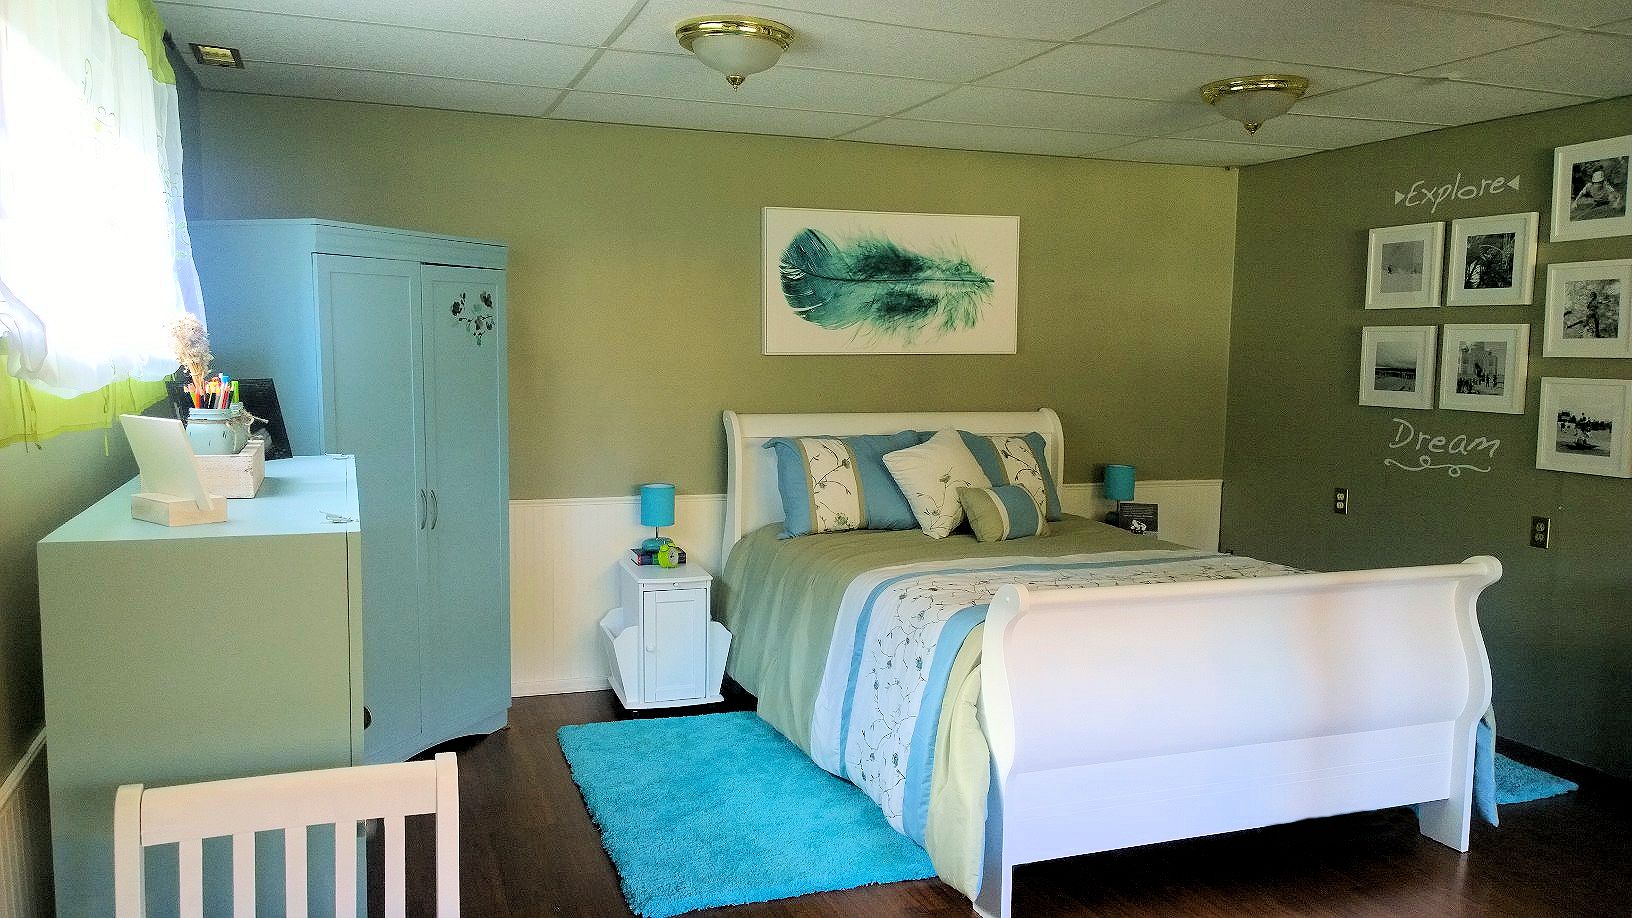 Room makeover project after photo turning a teen bedroom into a craft room and spare bedroom